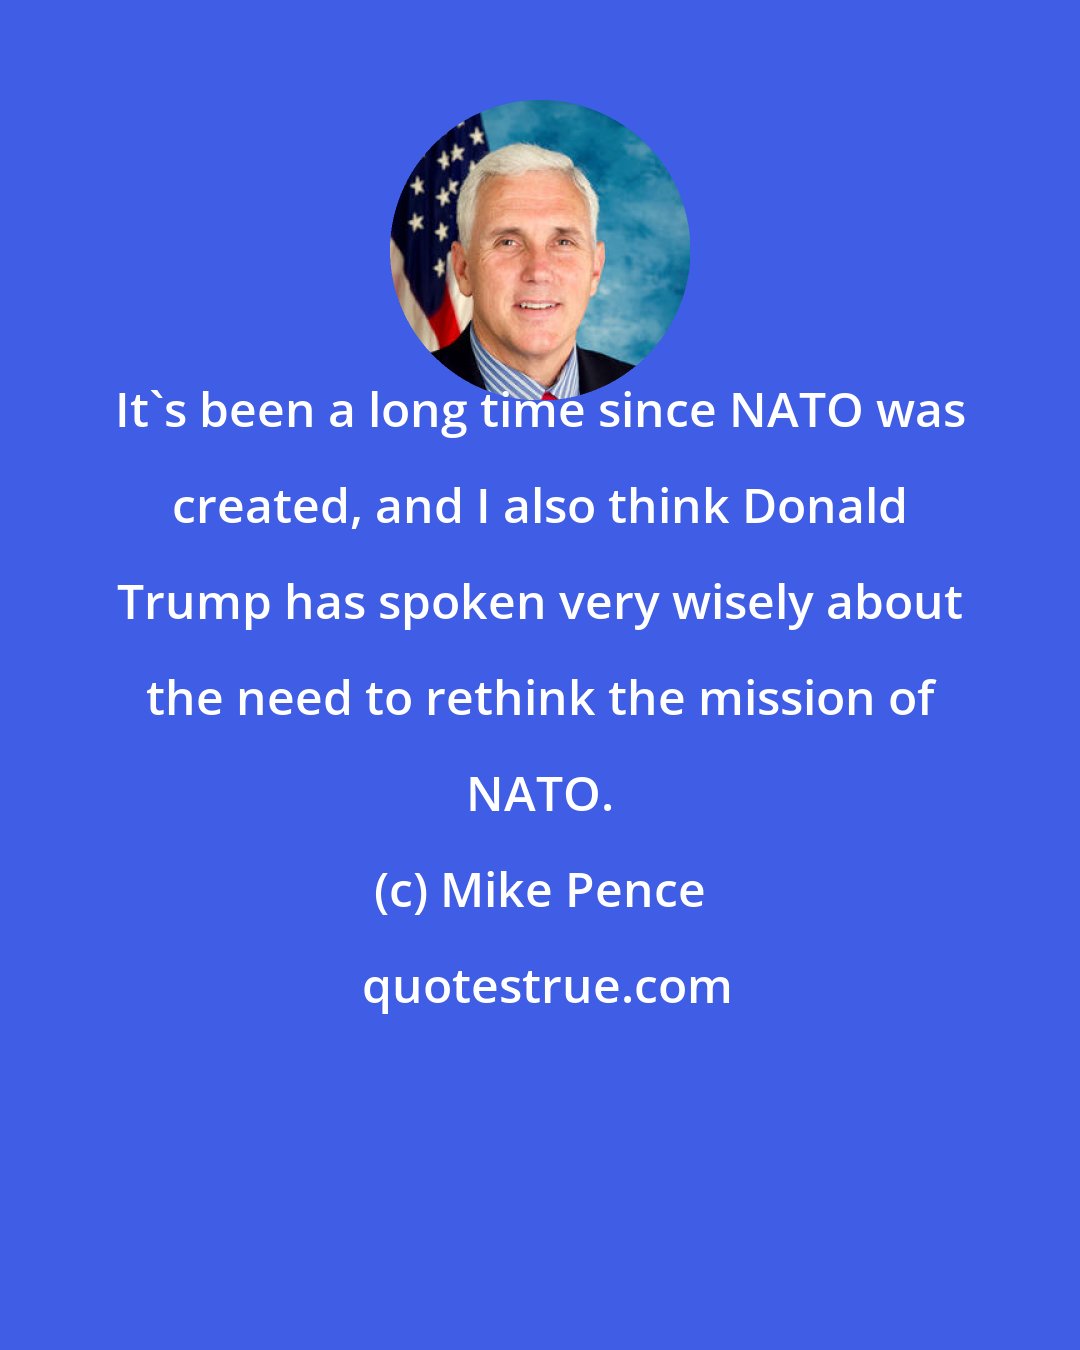 Mike Pence: It's been a long time since NATO was created, and I also think Donald Trump has spoken very wisely about the need to rethink the mission of NATO.